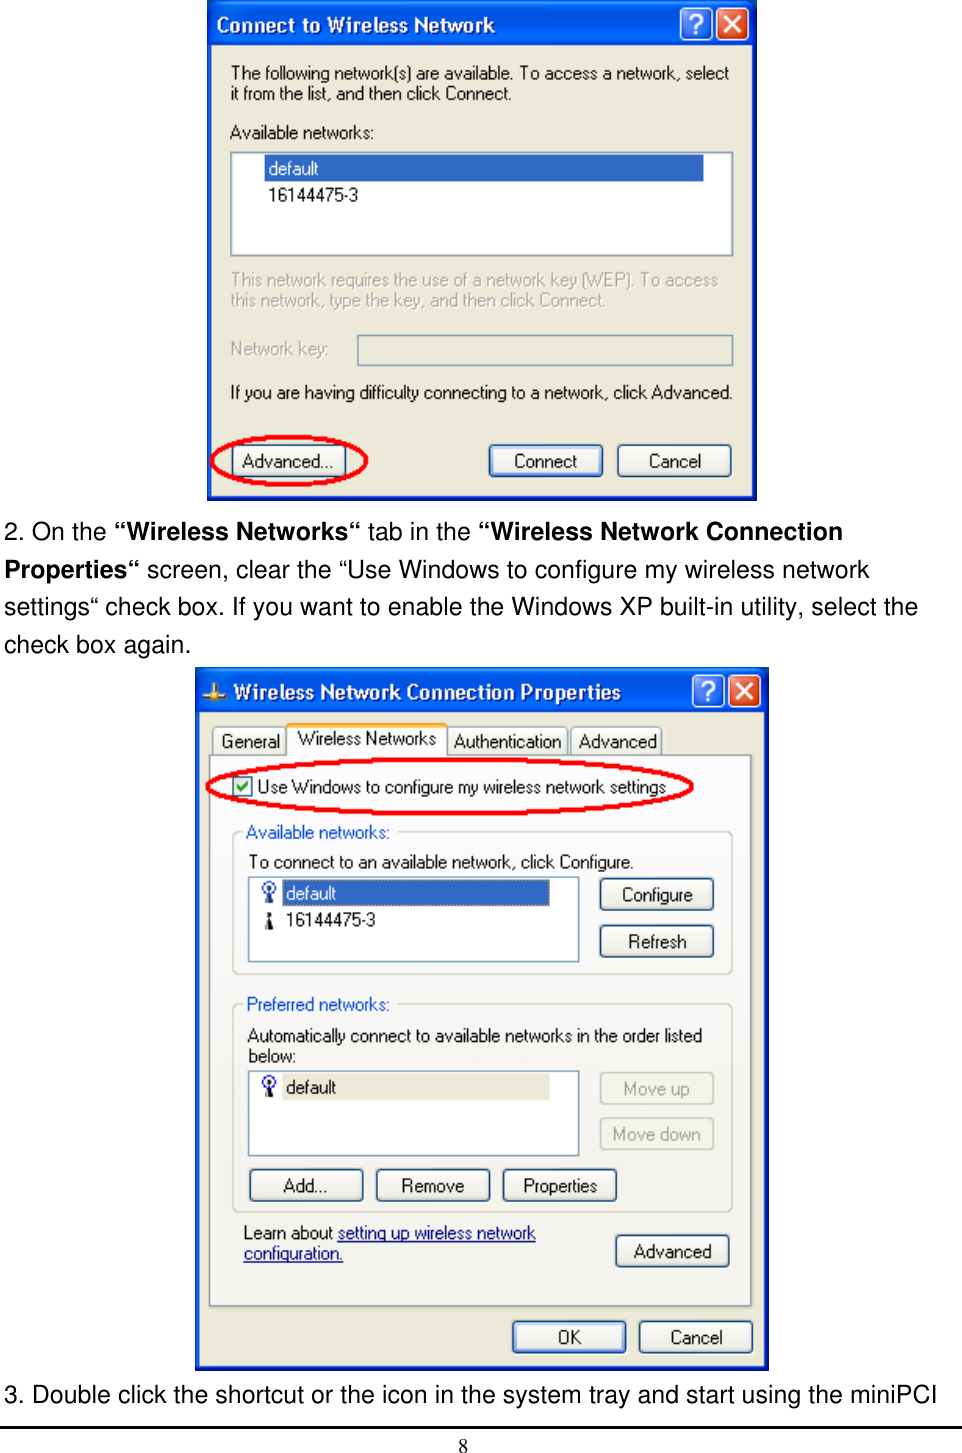   2. On the “Wireless Networks“ tab in the “Wireless Network Connection Properties“ screen, clear the “Use Windows to configure my wireless network settings“ check box. If you want to enable the Windows XP built-in utility, select the check box again.  3. Double click the shortcut or the icon in the system tray and start using the miniPCI 8  